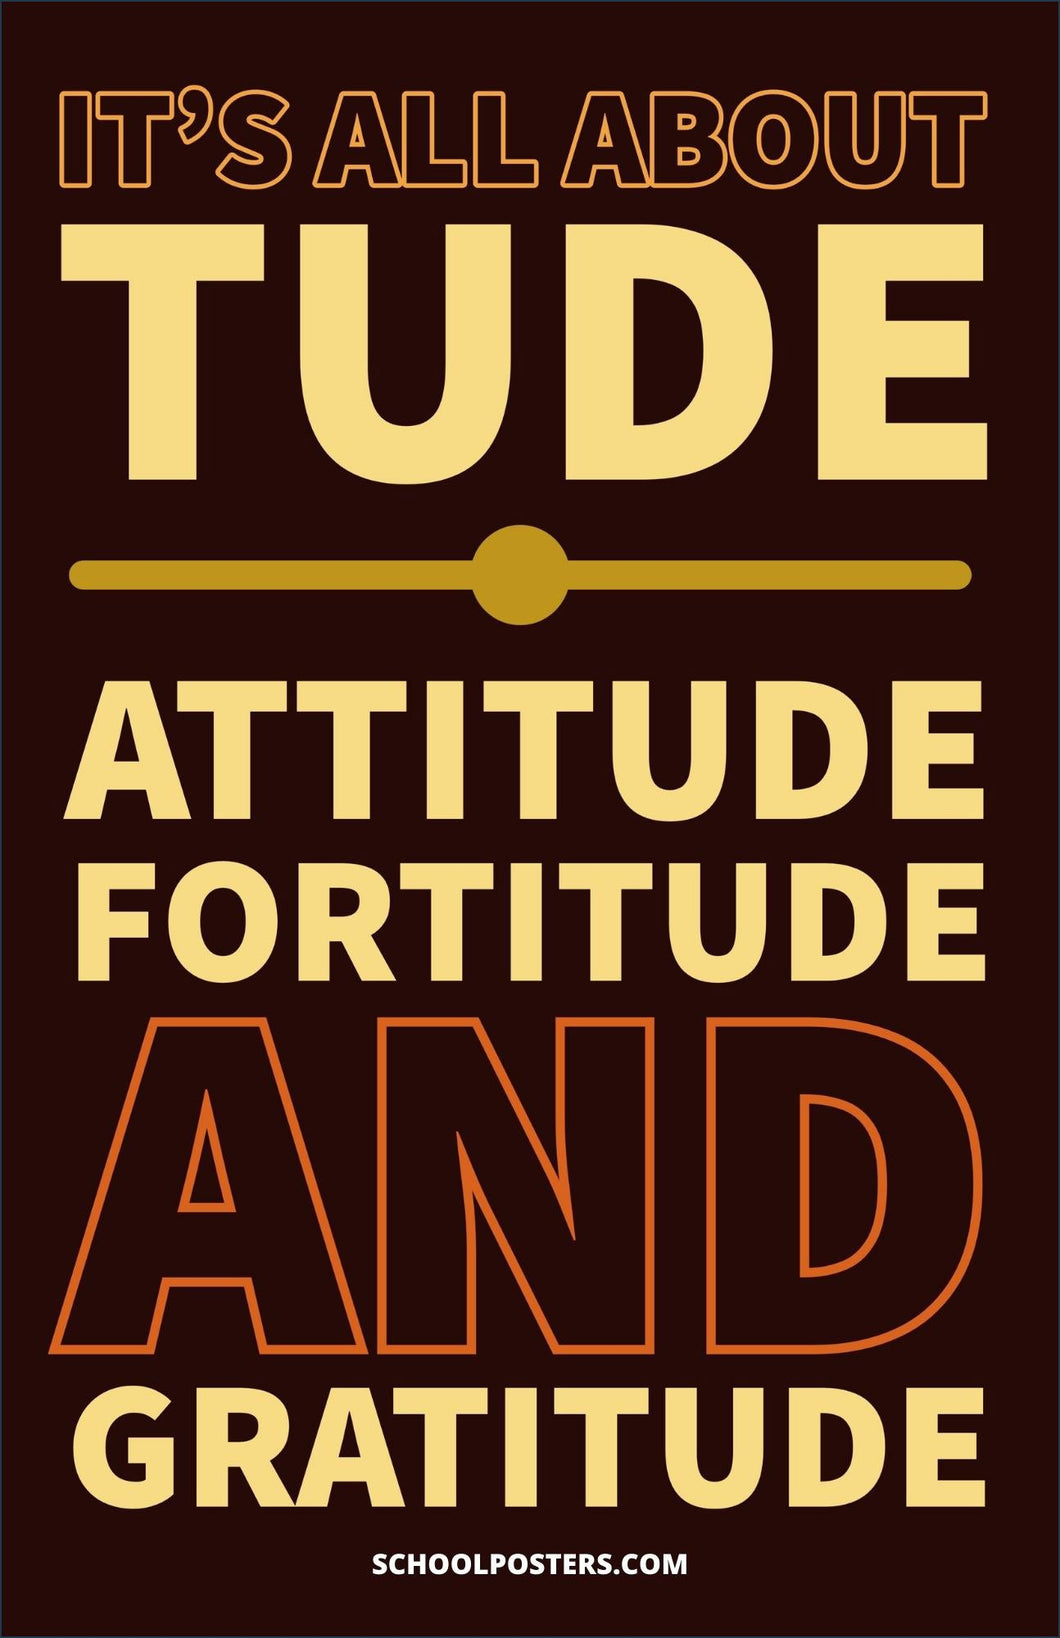 It Is All About Tude Poster